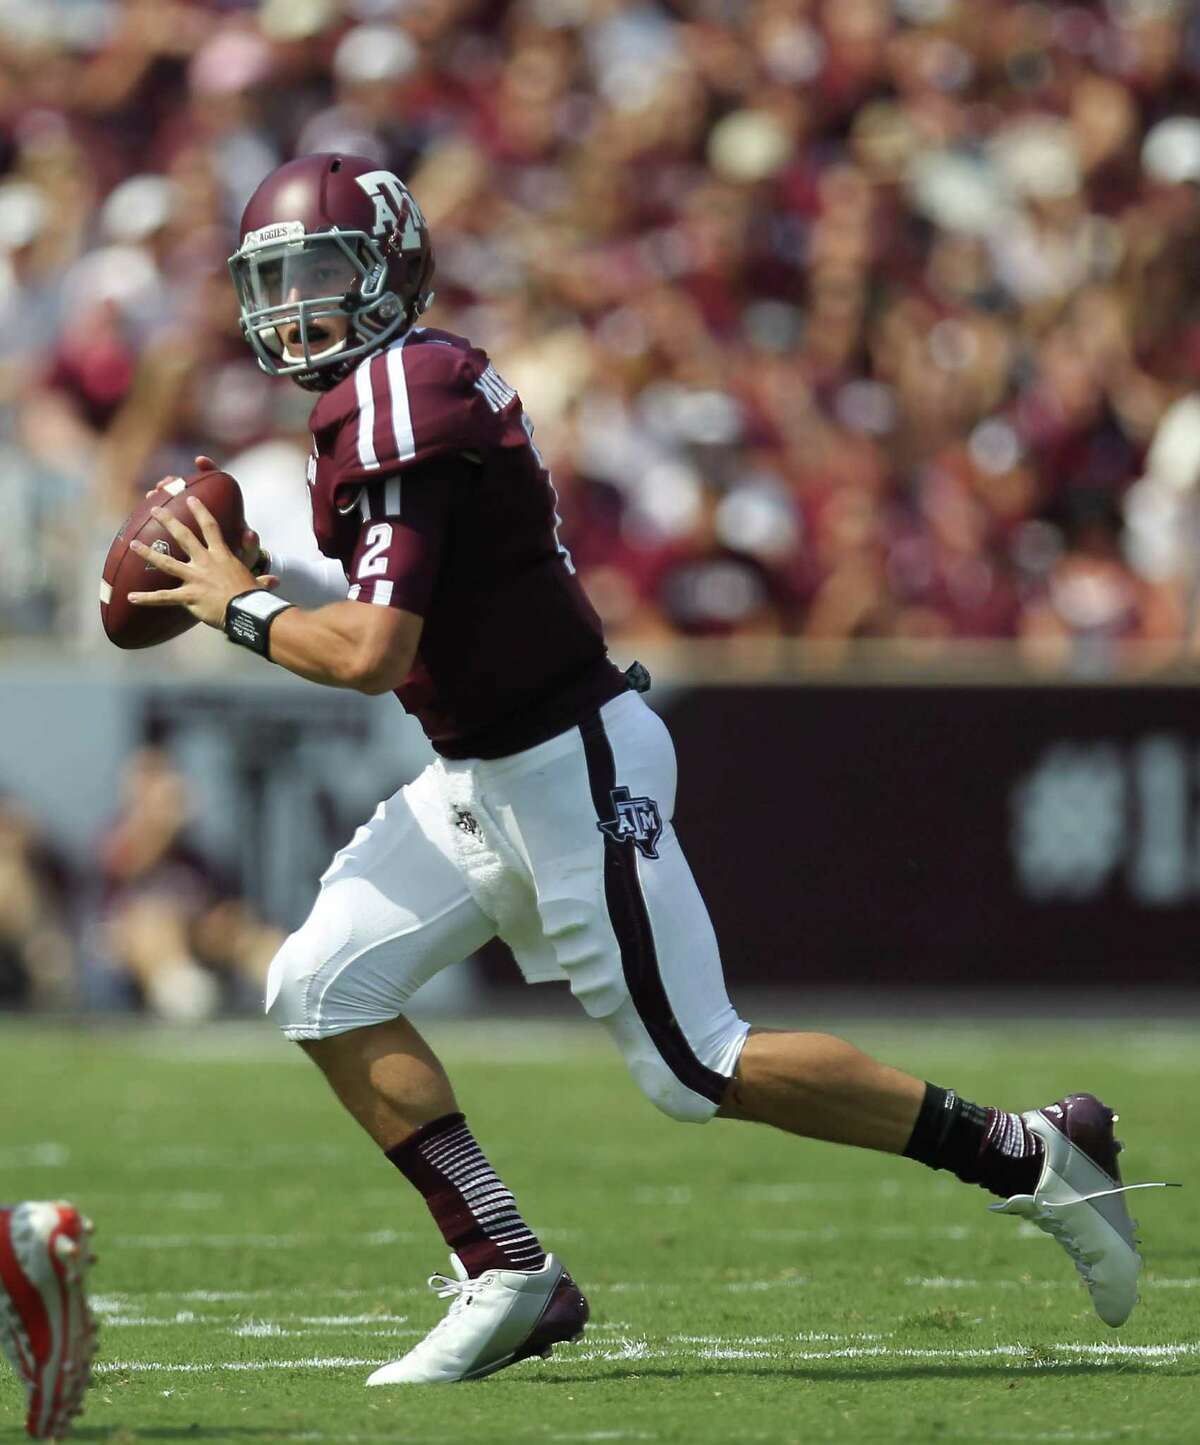 Texas A&M University quarterback Johnny Manziel (2) scrambles to find an open receiver during the first quarter of a NCAA football game against the University of Florida, Saturday, Sept. 8, 2012, at Kyle Field in College Station.